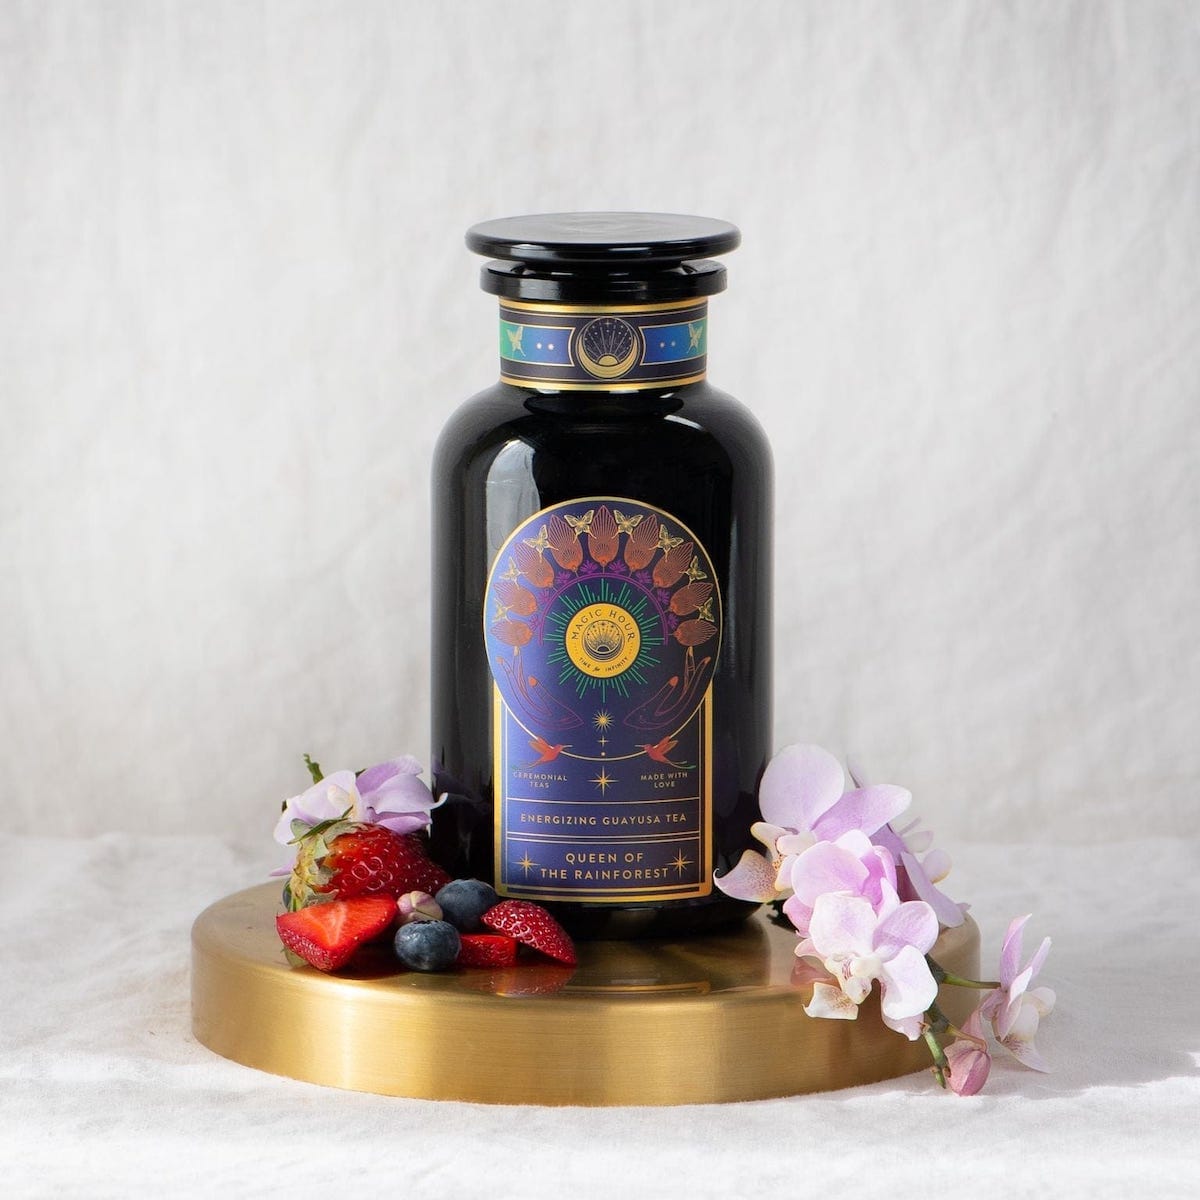 A dark glass jar labeled "Queen of the Rainforest : Cacao-Berry Tea" by Magic Hour sits on a circular wooden stand, surrounded by fresh strawberries, blueberries, and delicate purple and white flowers. The organic tea promises a delightful experience. In the background is a soft white cloth, enhancing the serene ambiance.